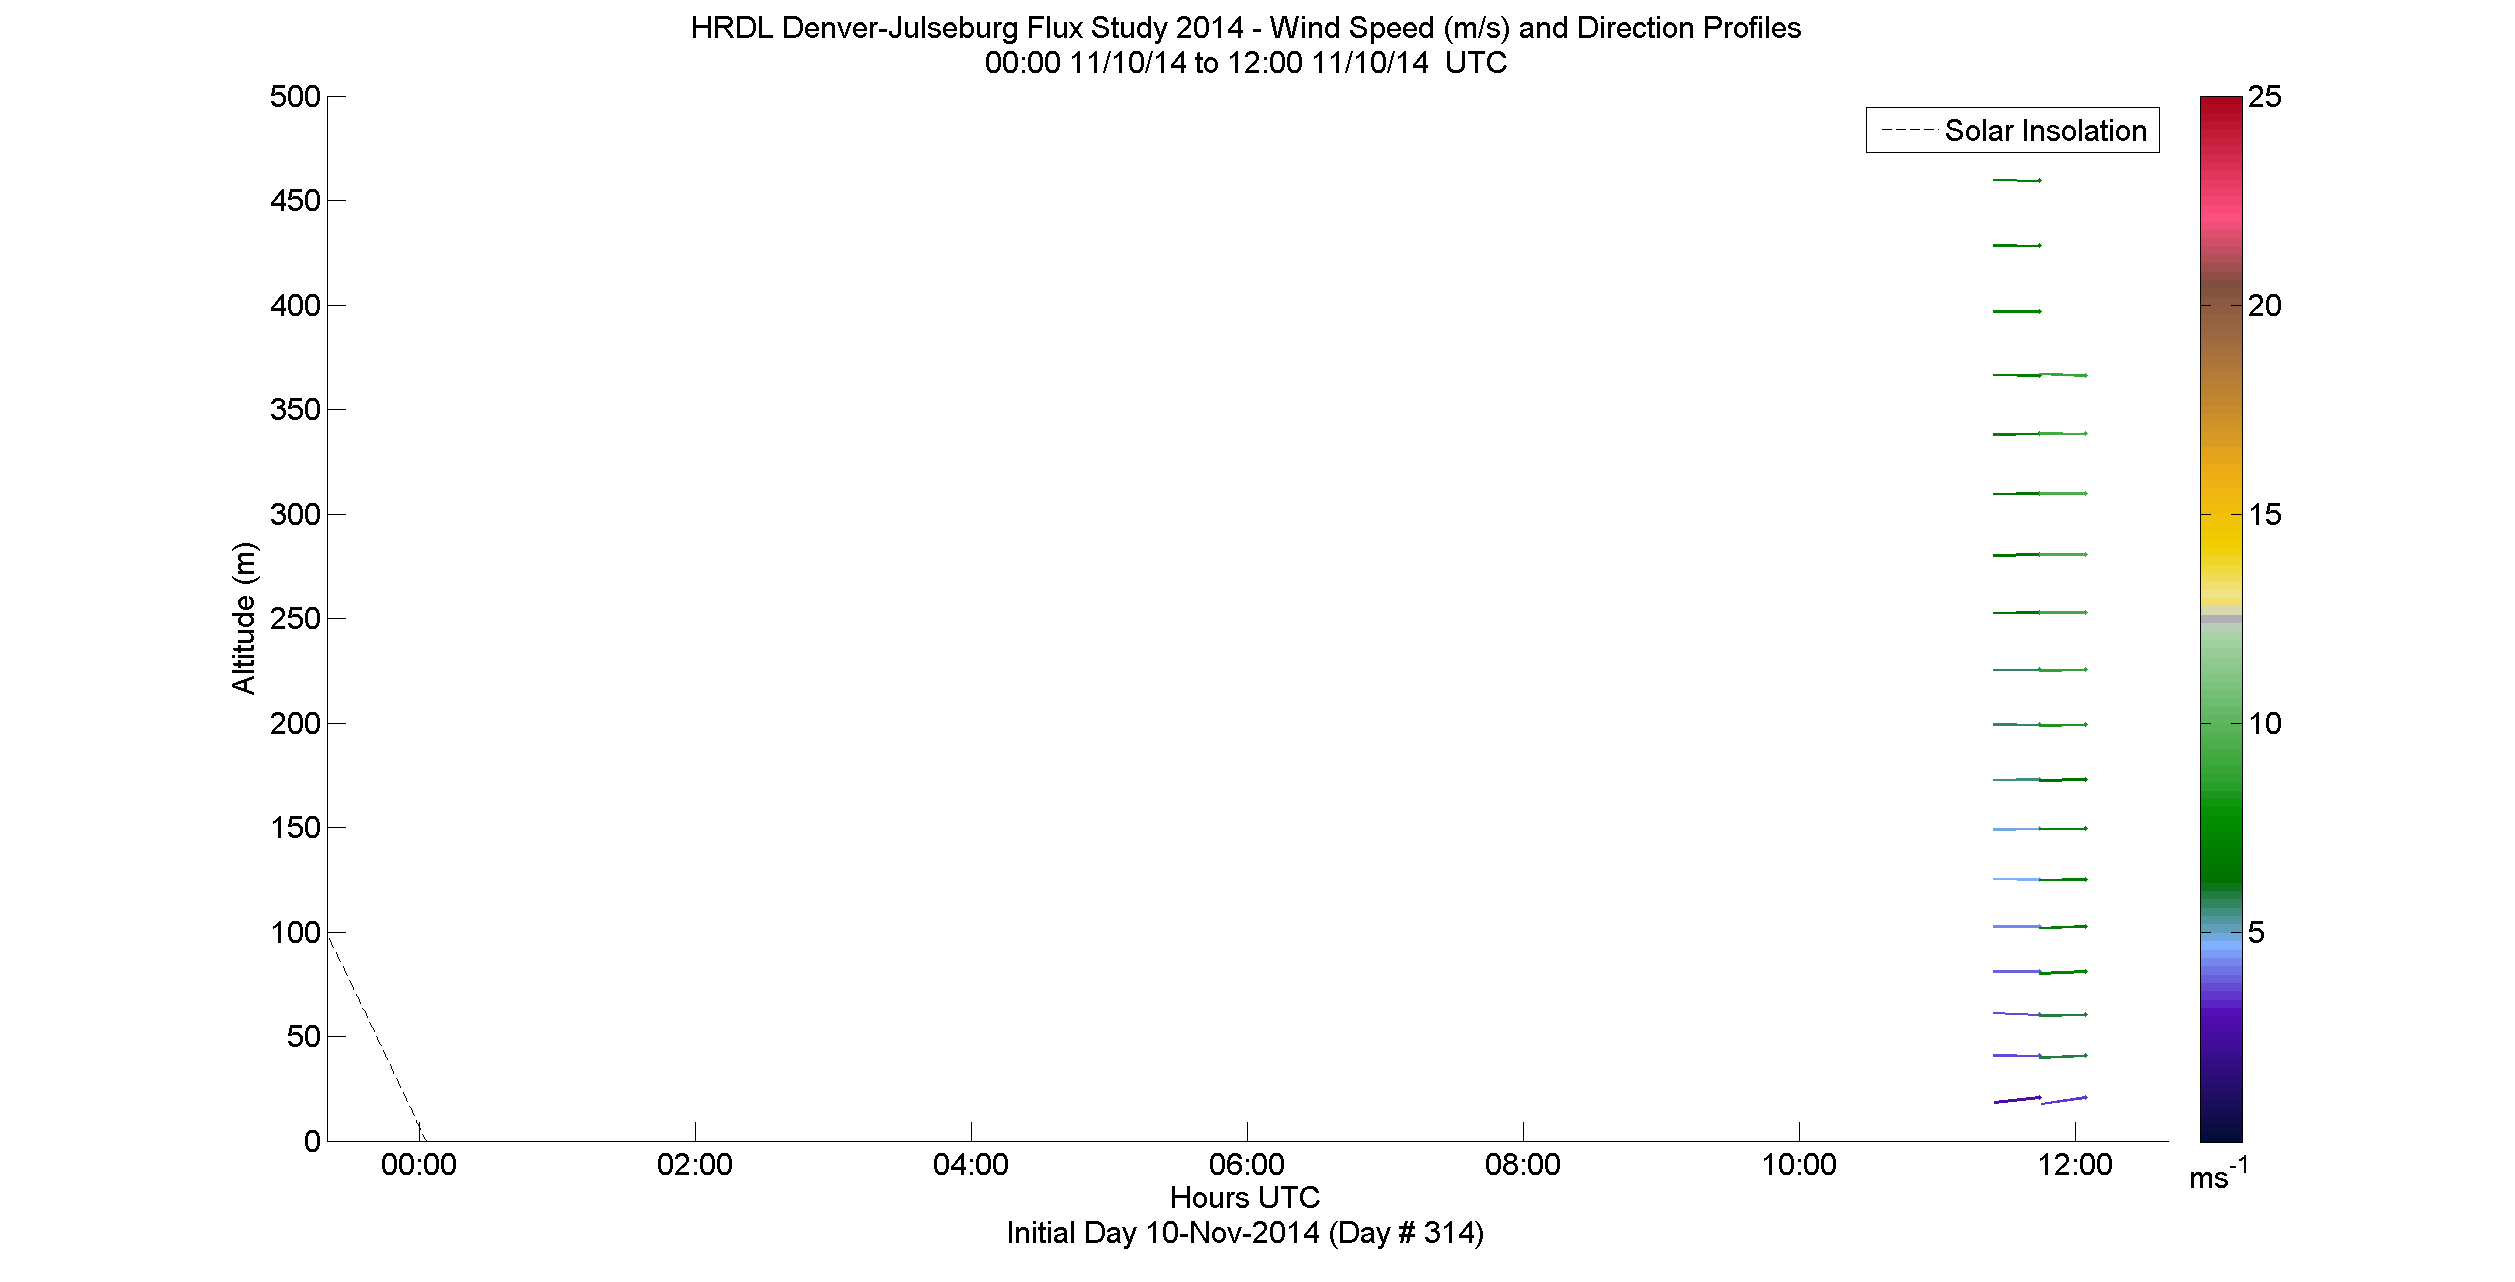 HRDL speed and direction profile - November 10 am